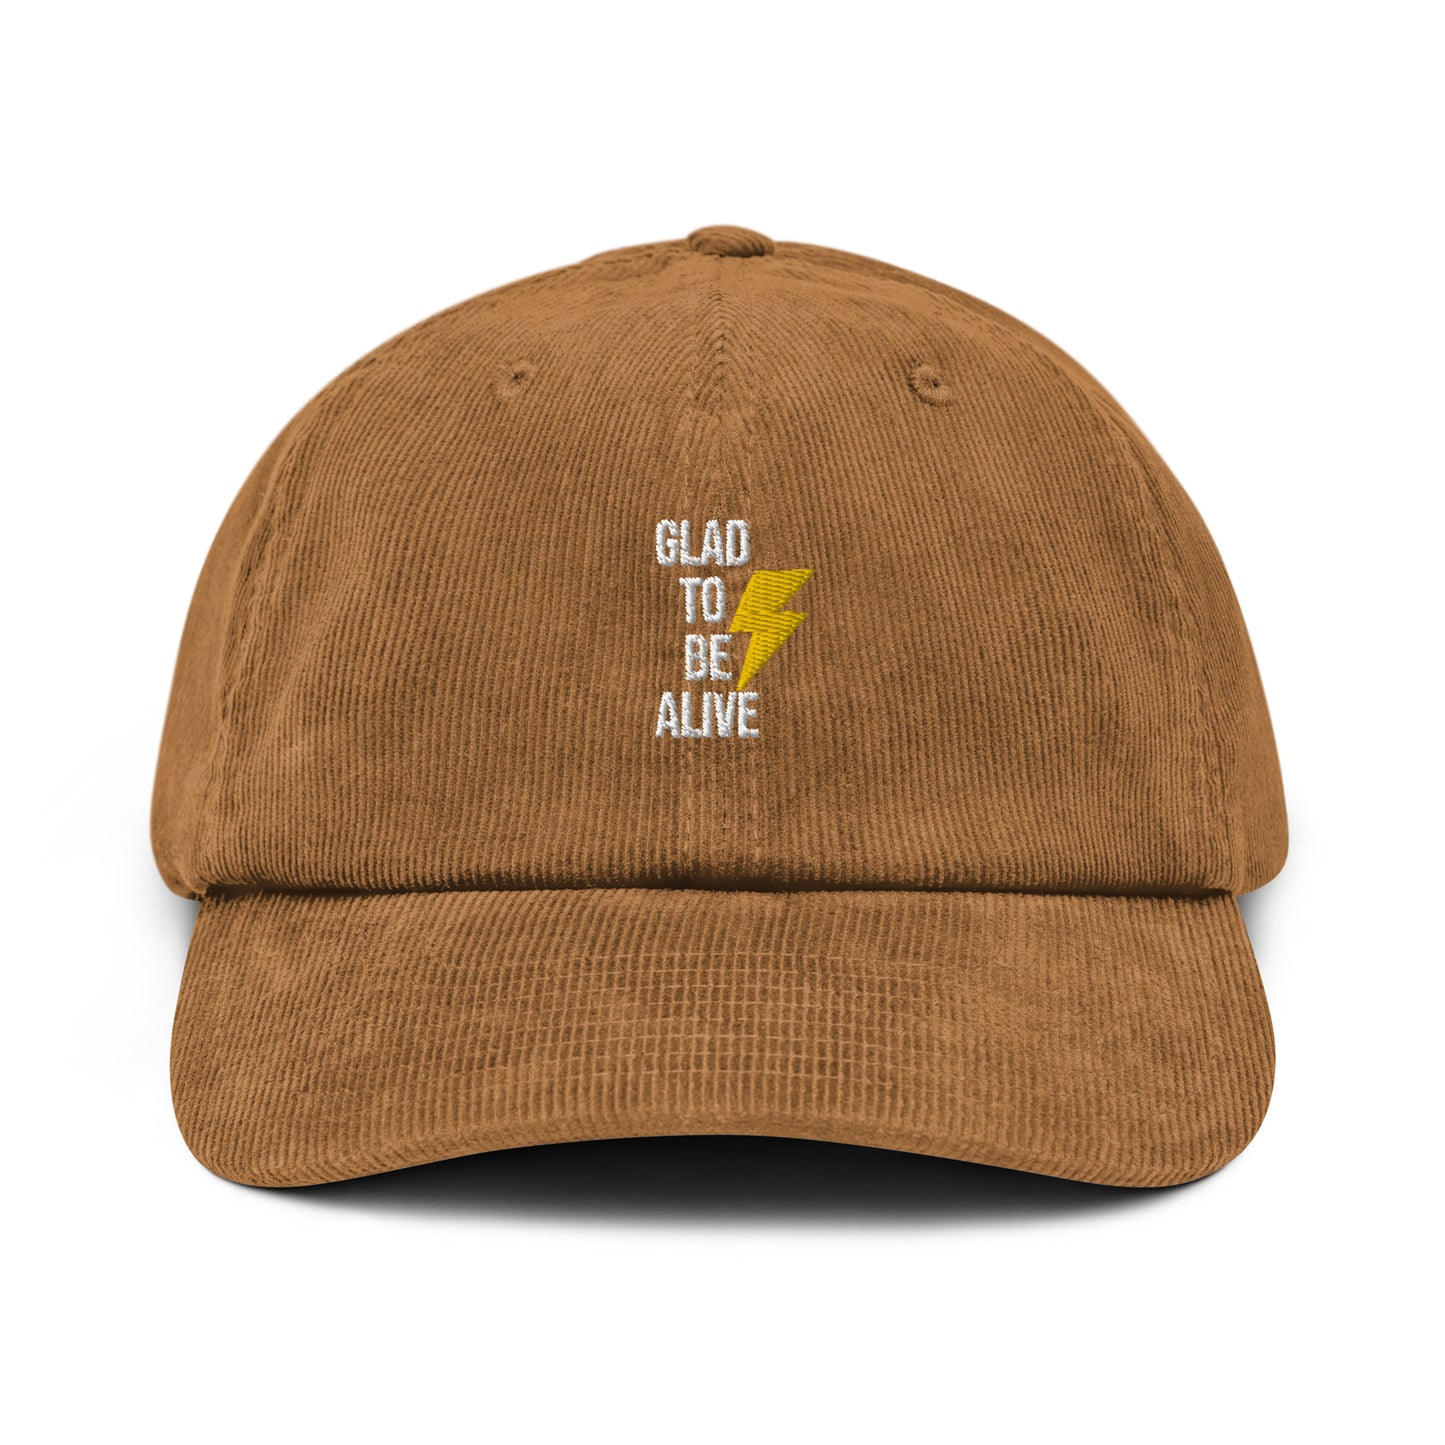 Glad To Be Alive (Corduroy hat)